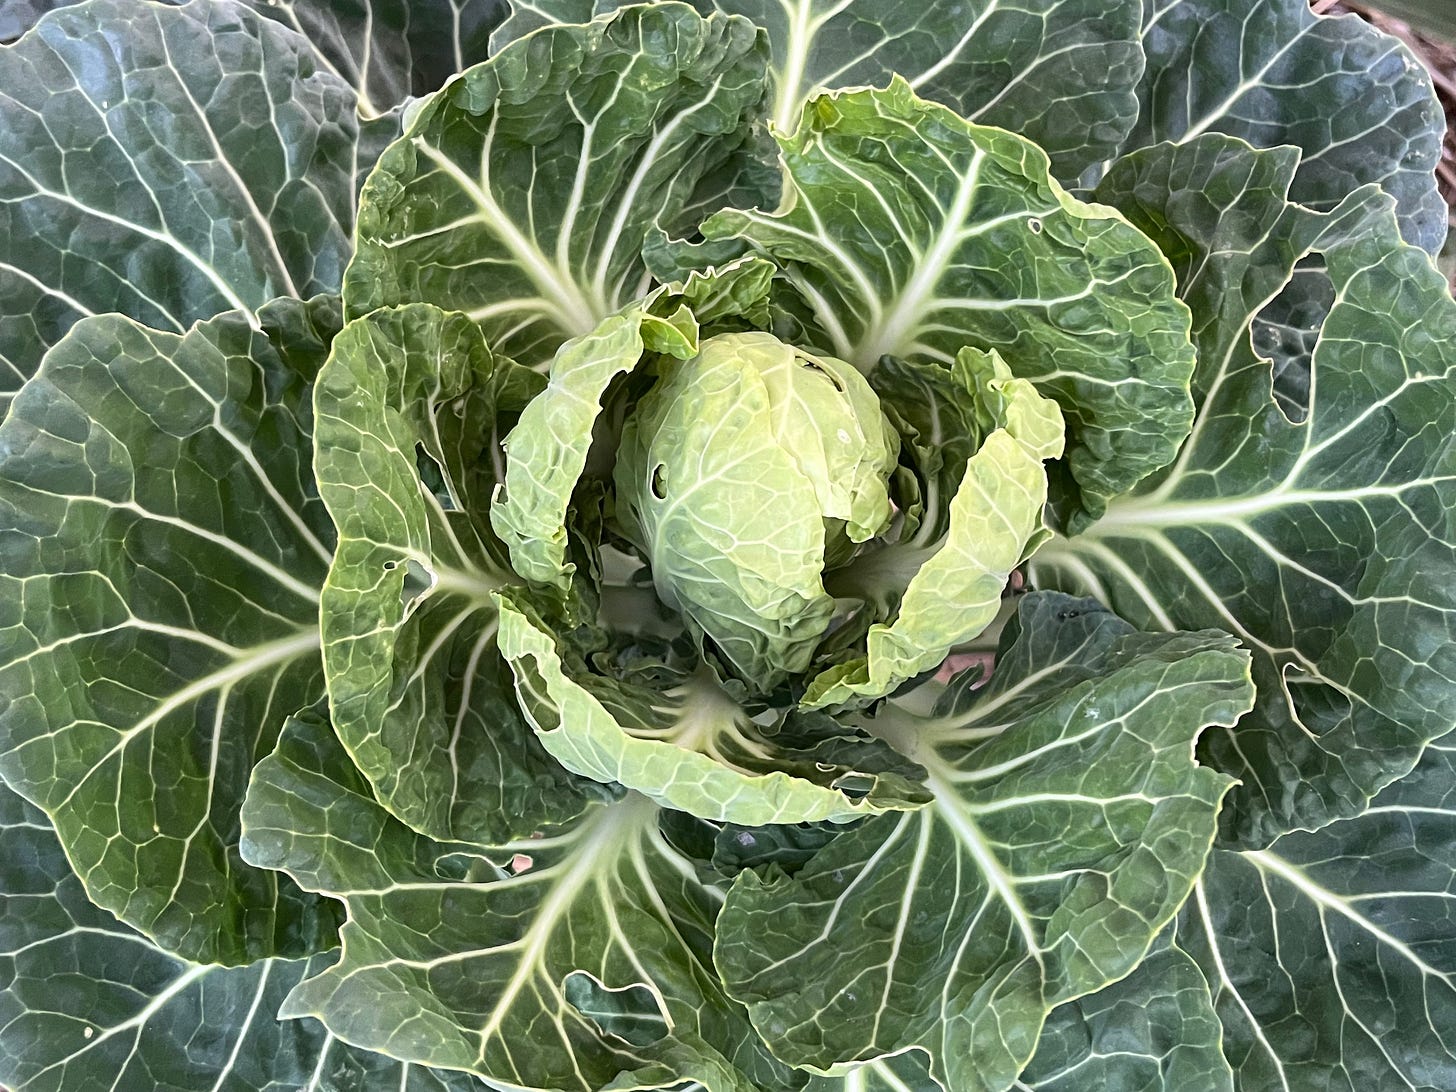 An overhead picture of a head of cabbage